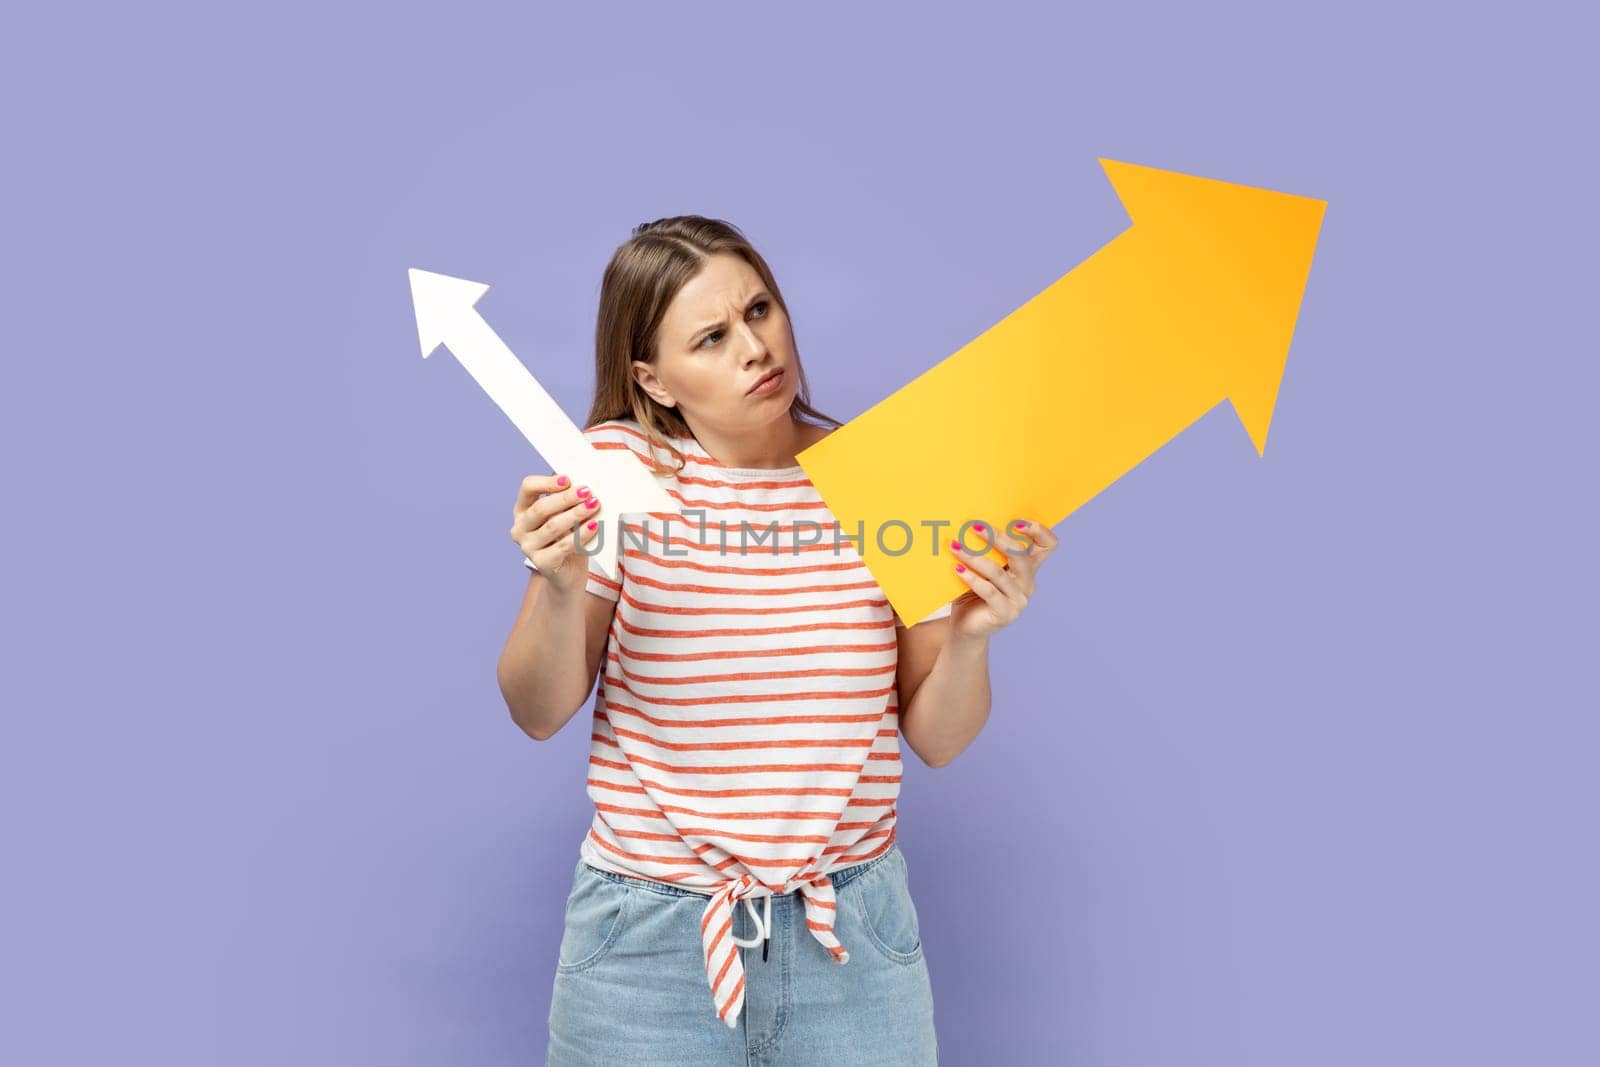 Portrait of confused pensive woman wearing striped T-shirt holding two arrows indicating to different sizes, looking at indicators with puzzlement. Indoor studio shot isolated on purple background.